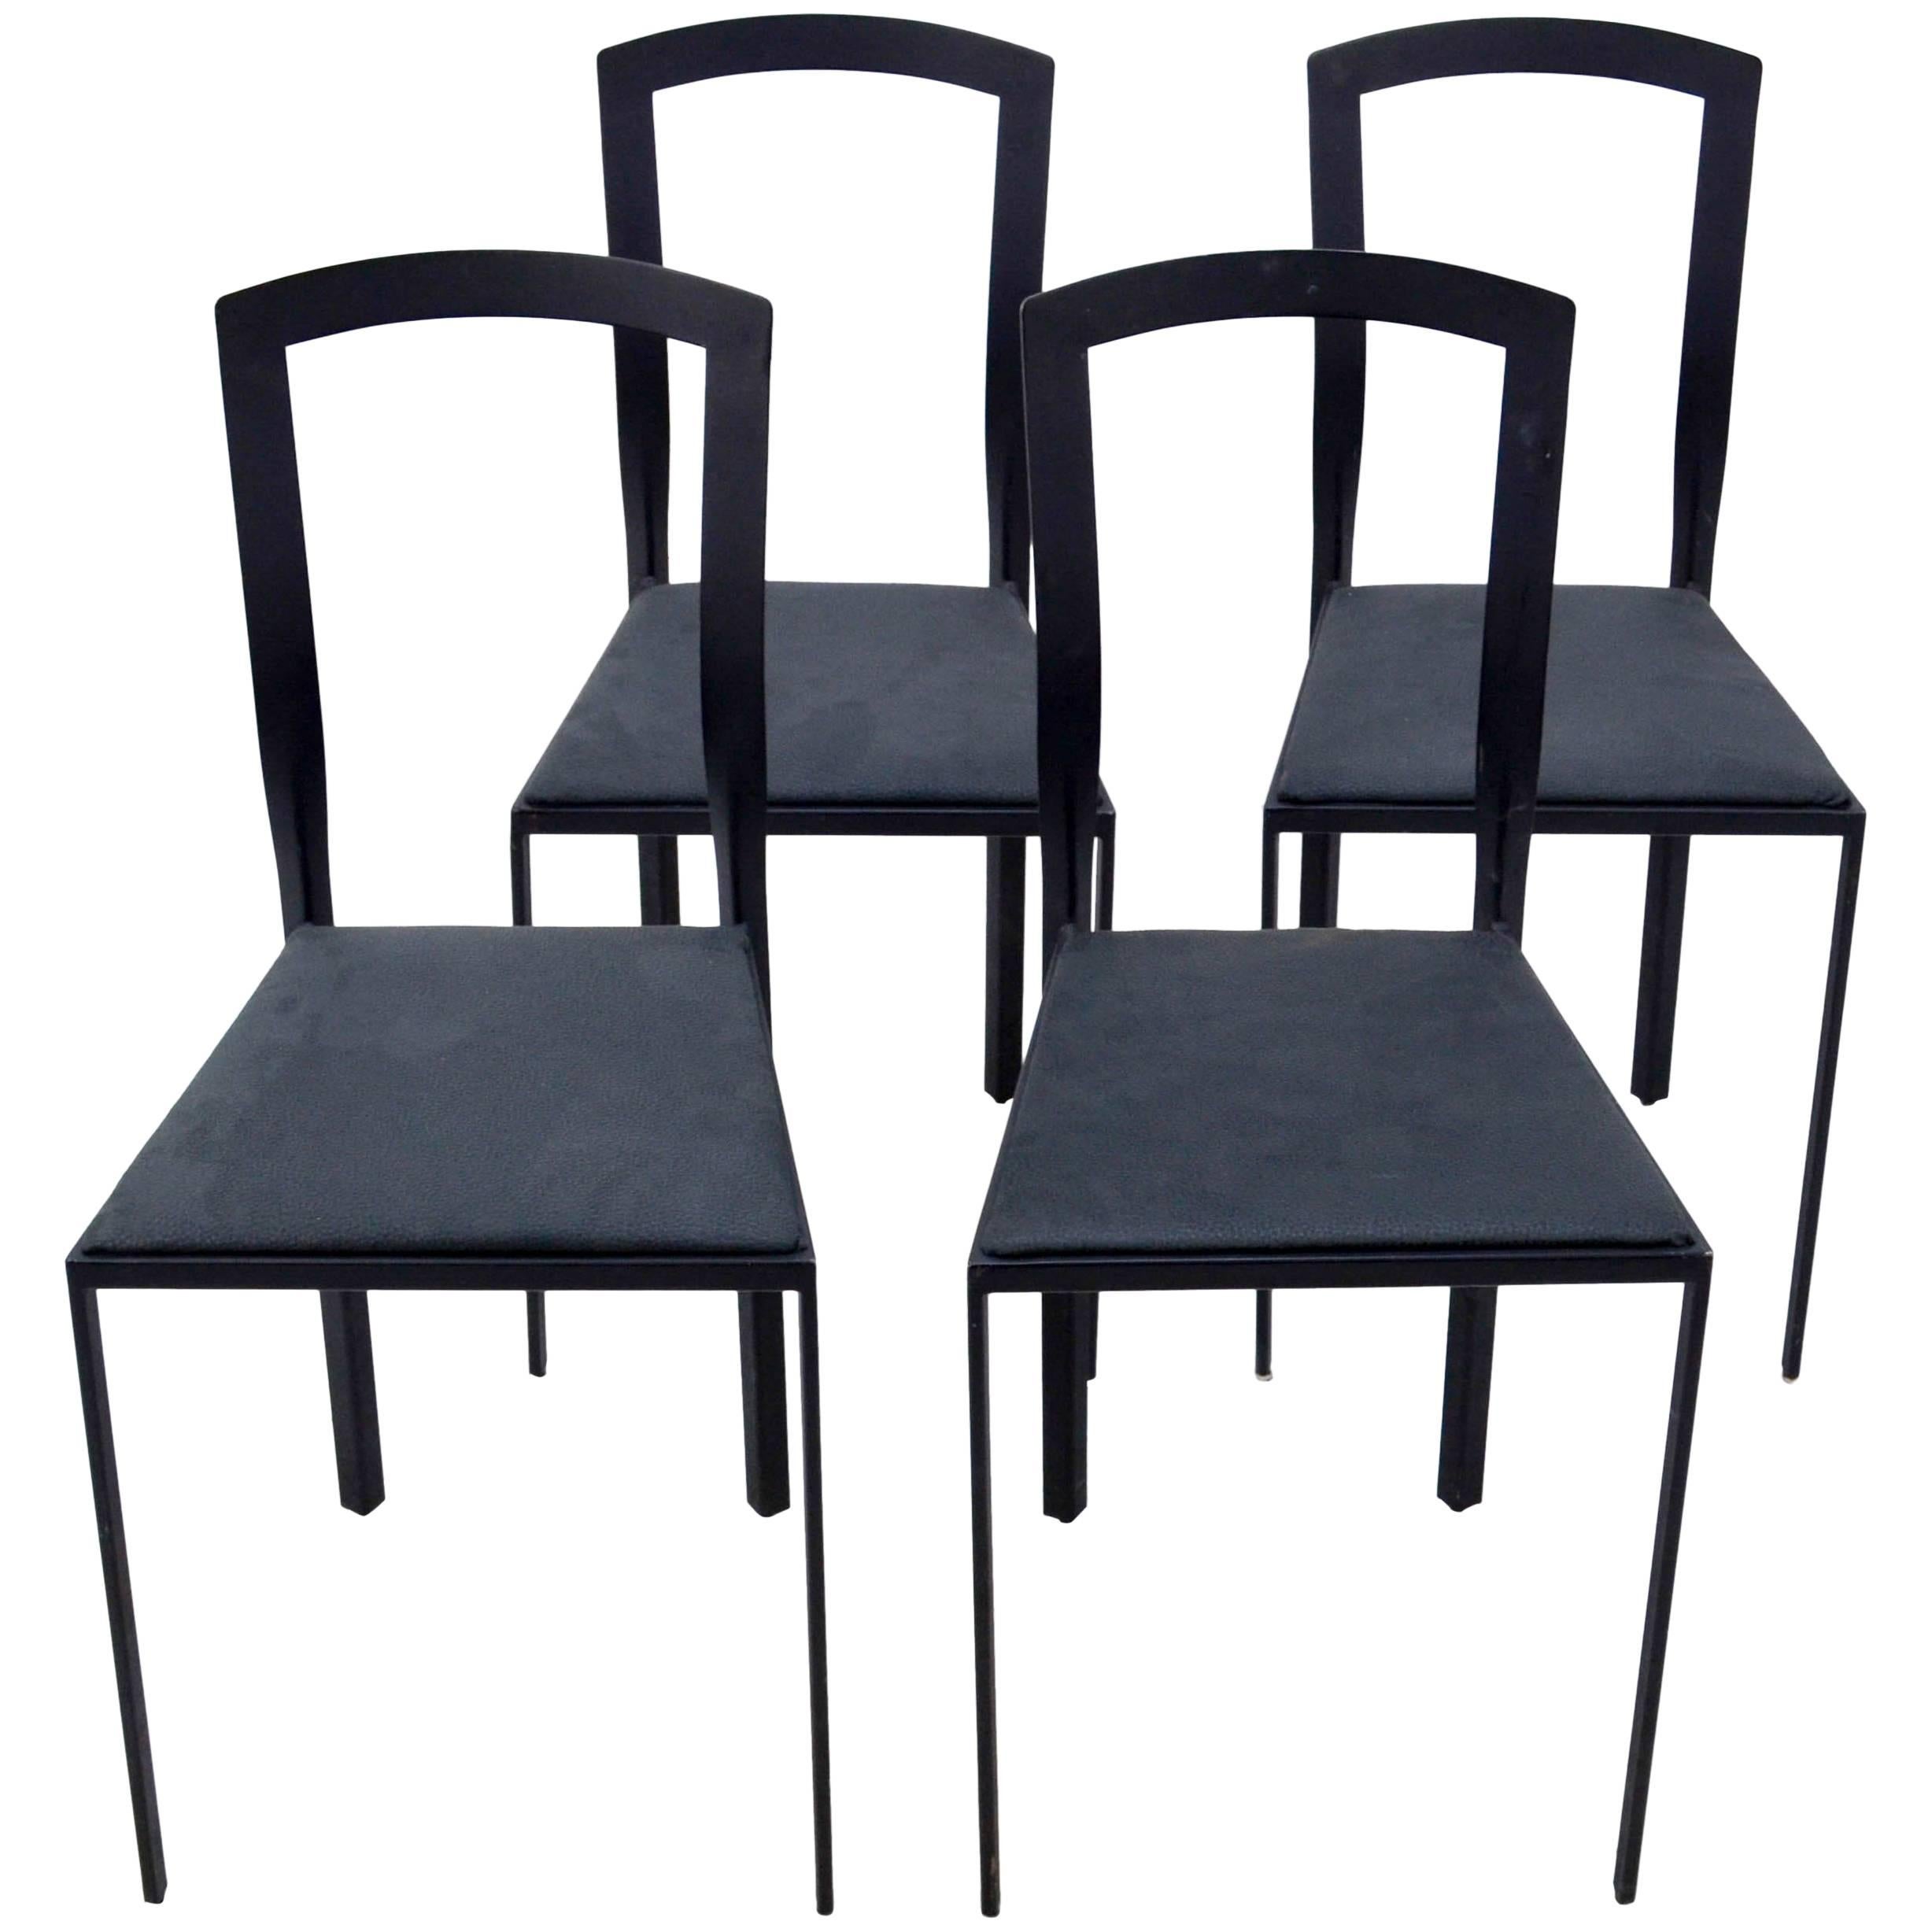 Four Unknown Steel Chairs, 1990s